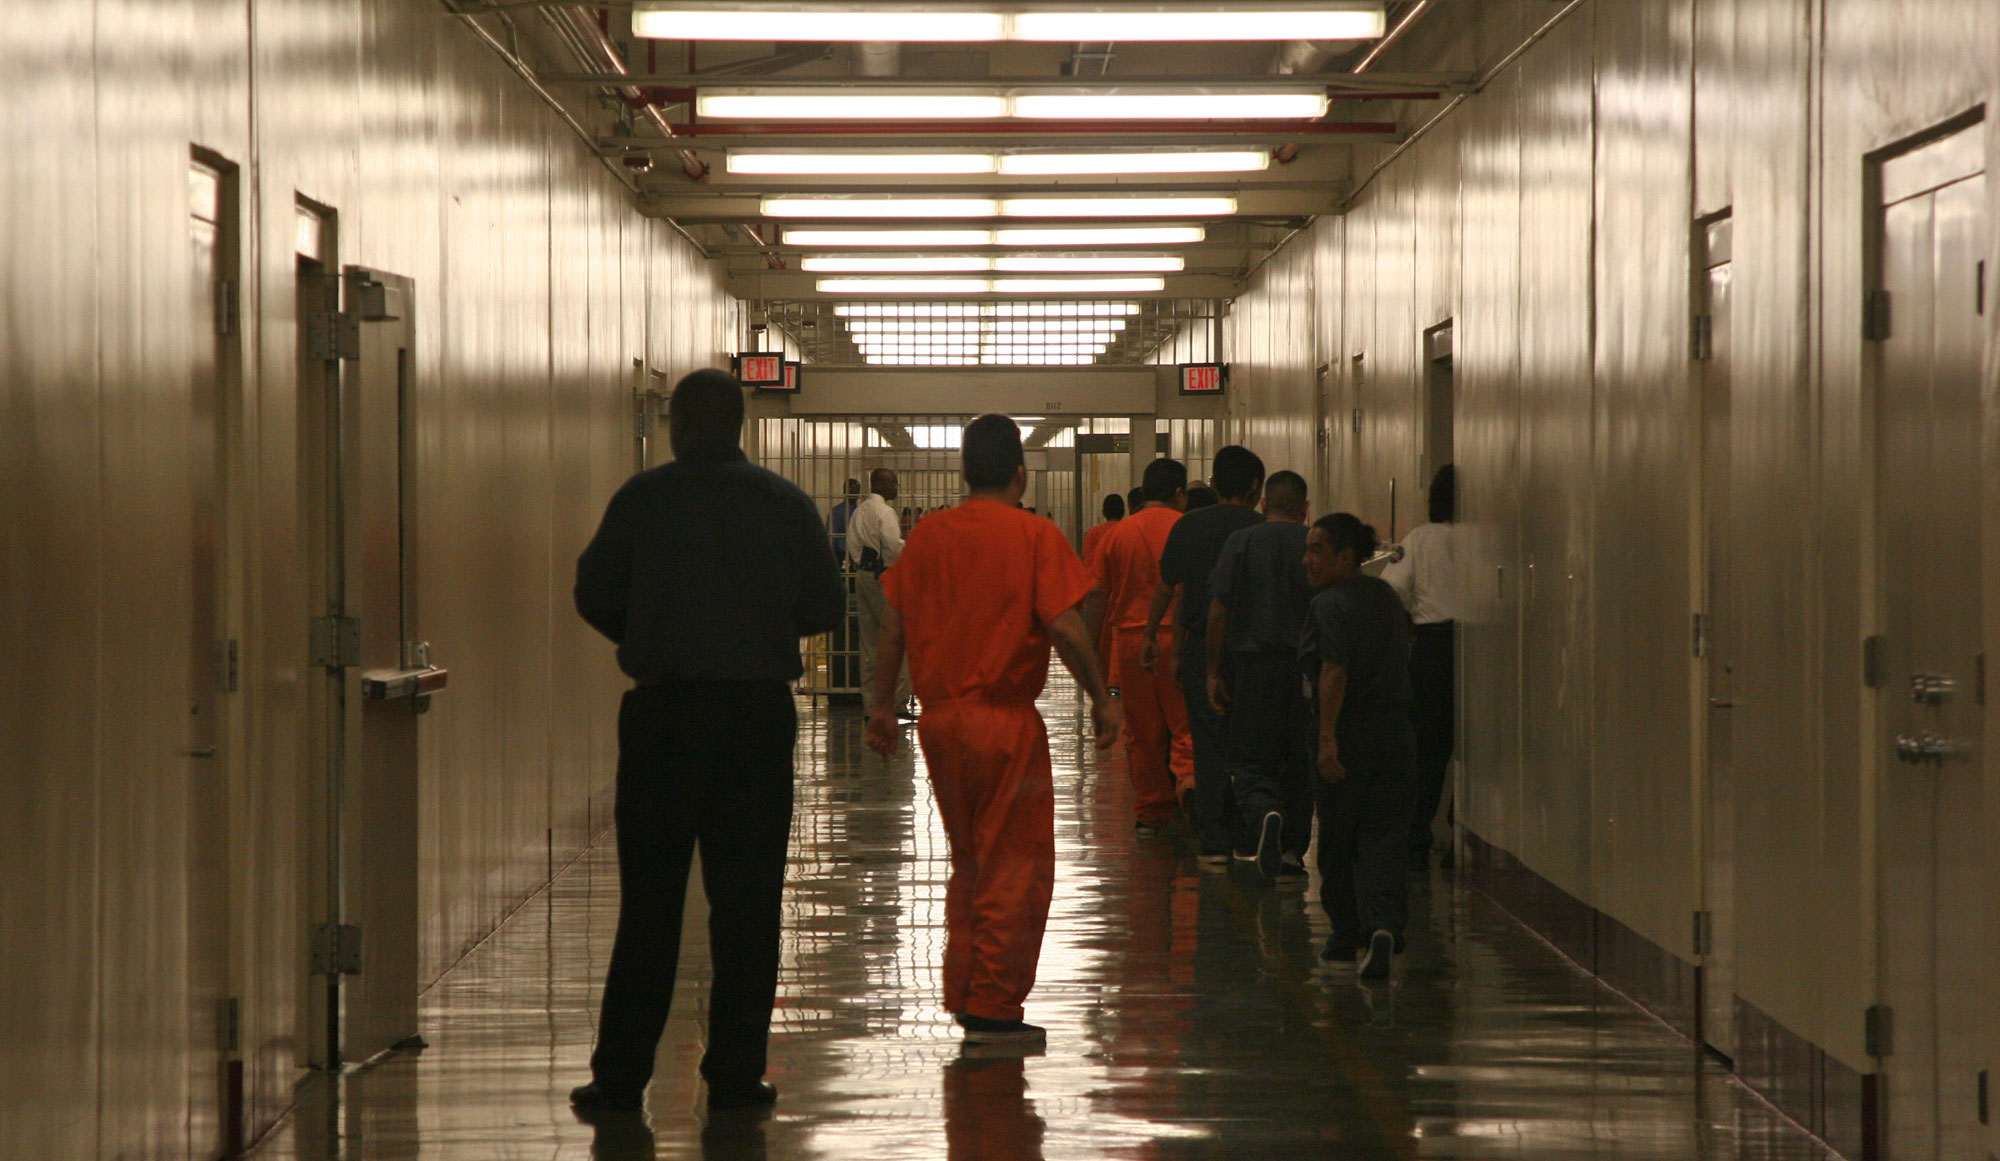 Detainees leave the the cafeteria at the Stewart Detention Facility, a Corrections Corporation of America immigration facility in Lumpkin, Georgia. (AP/Kate Brumback)